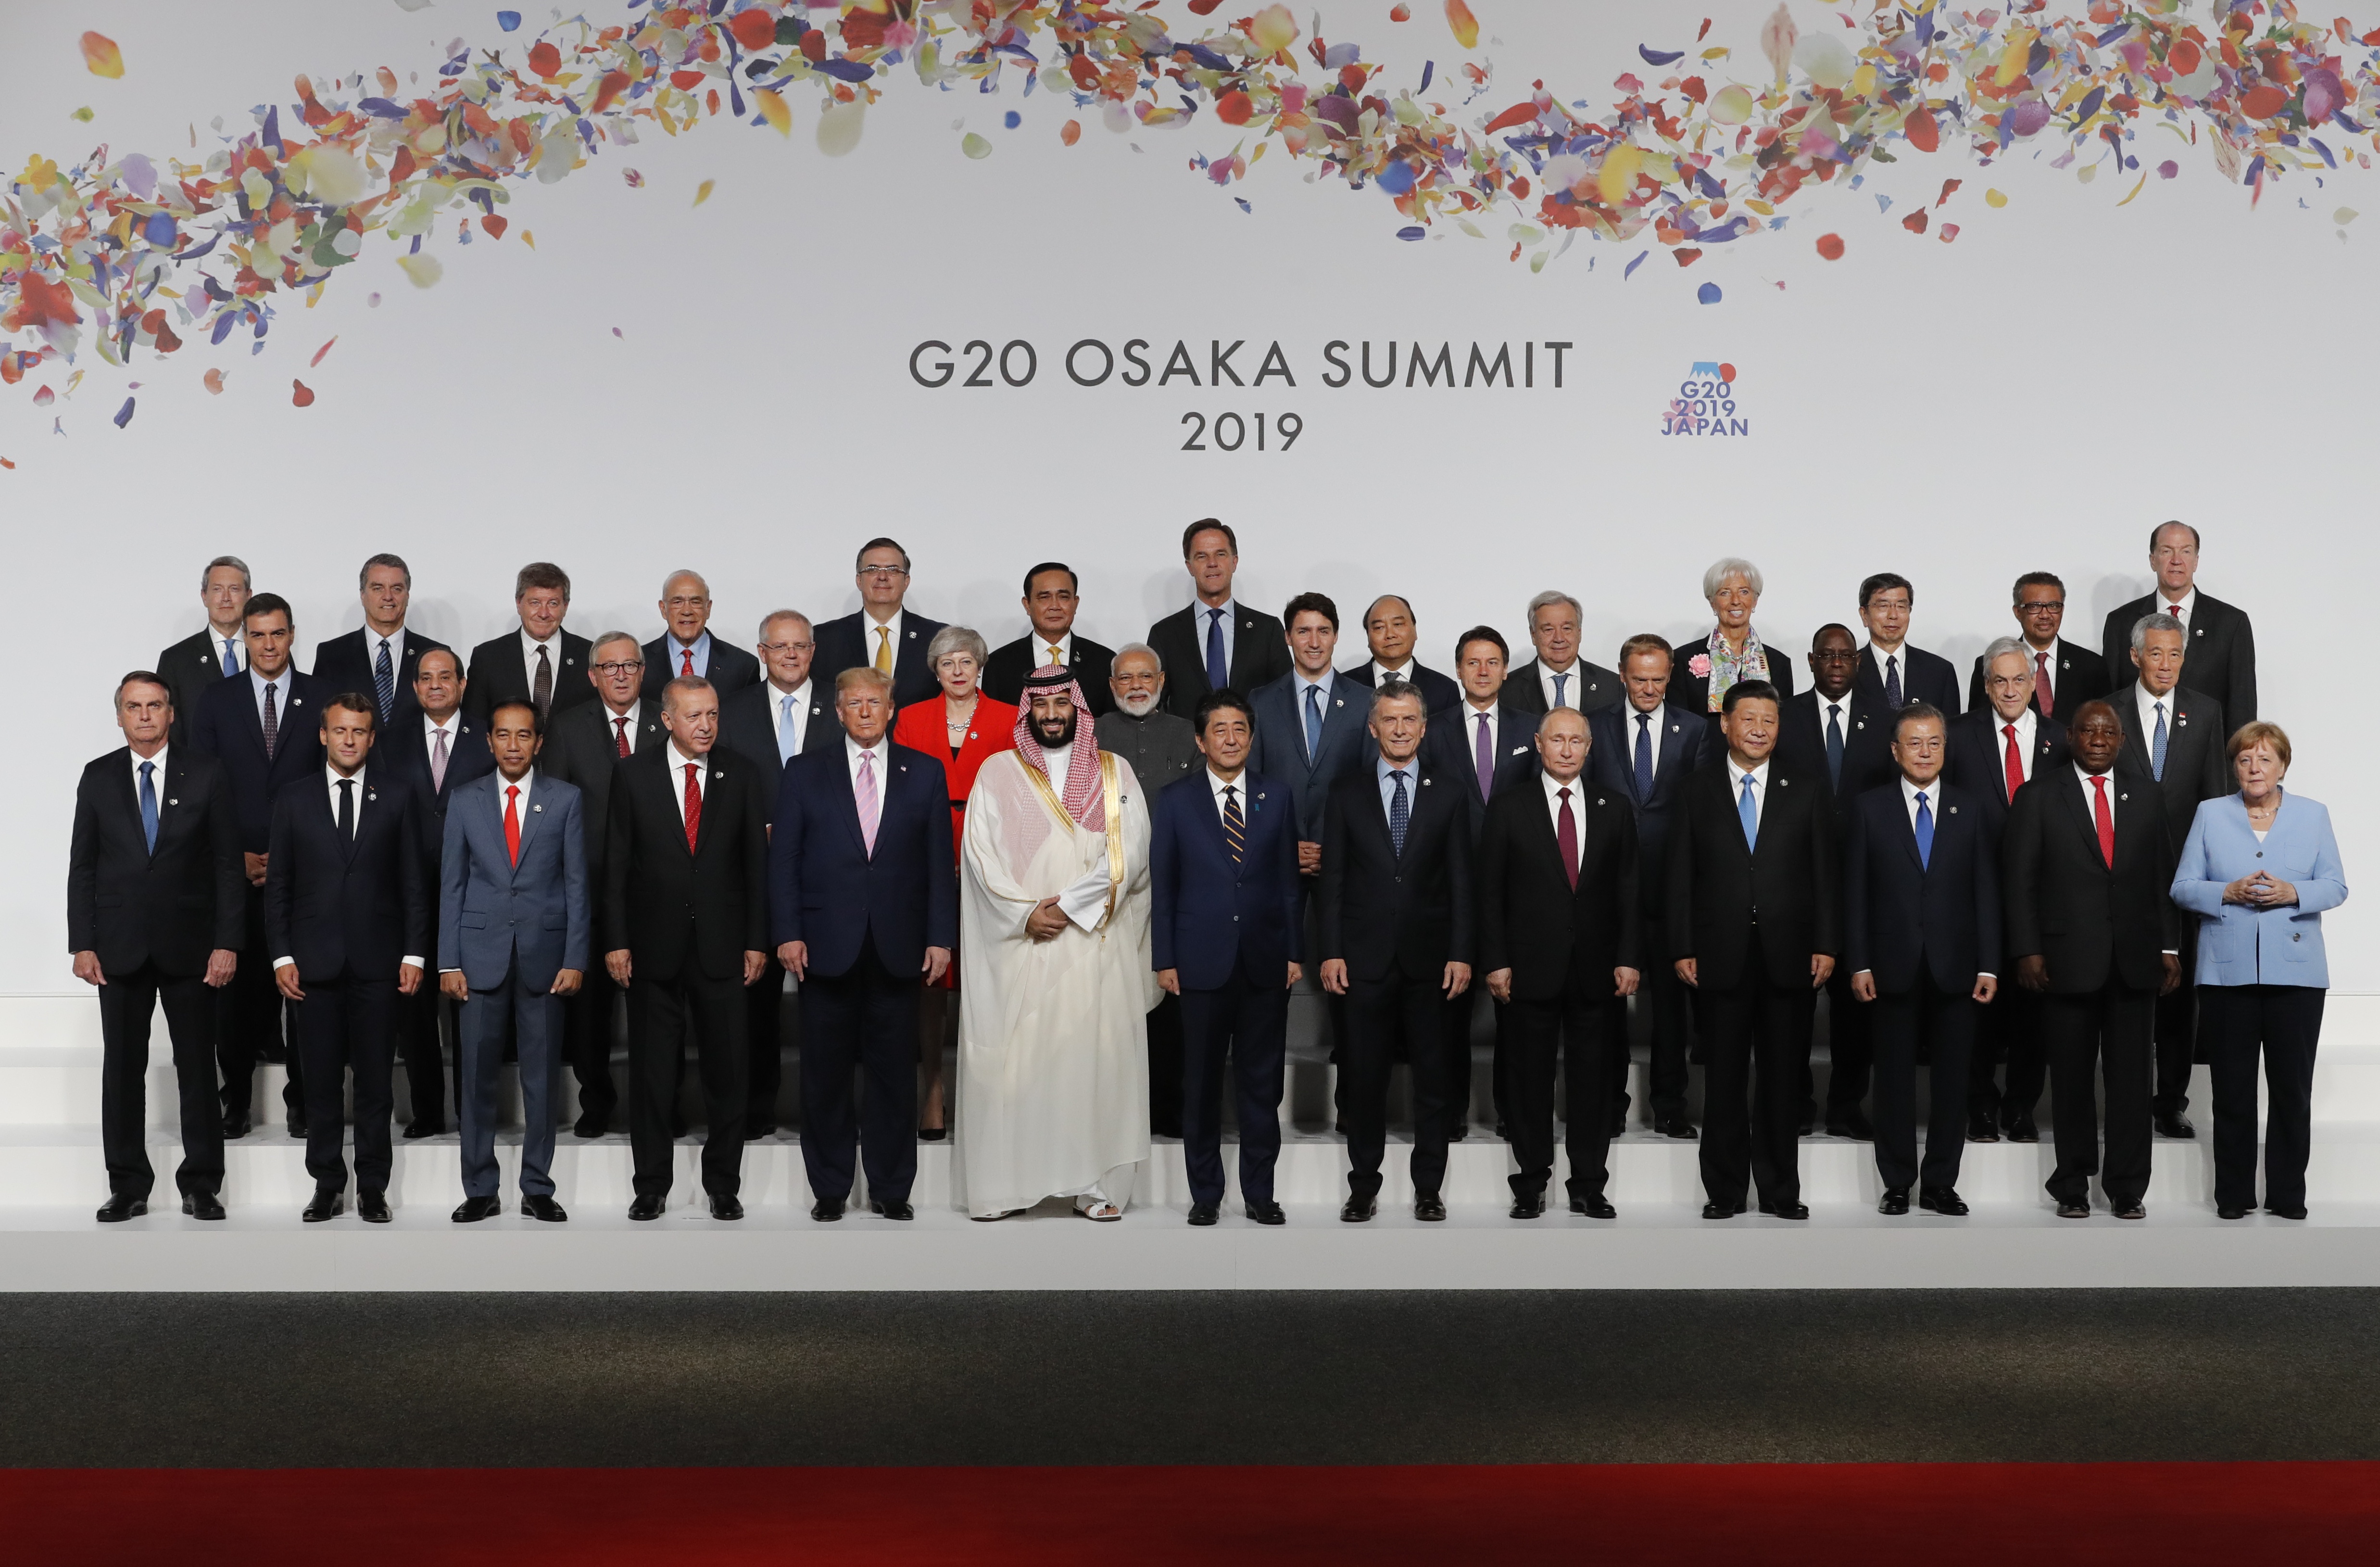 World leaders attend a family photo session at the G20 in Osaka.